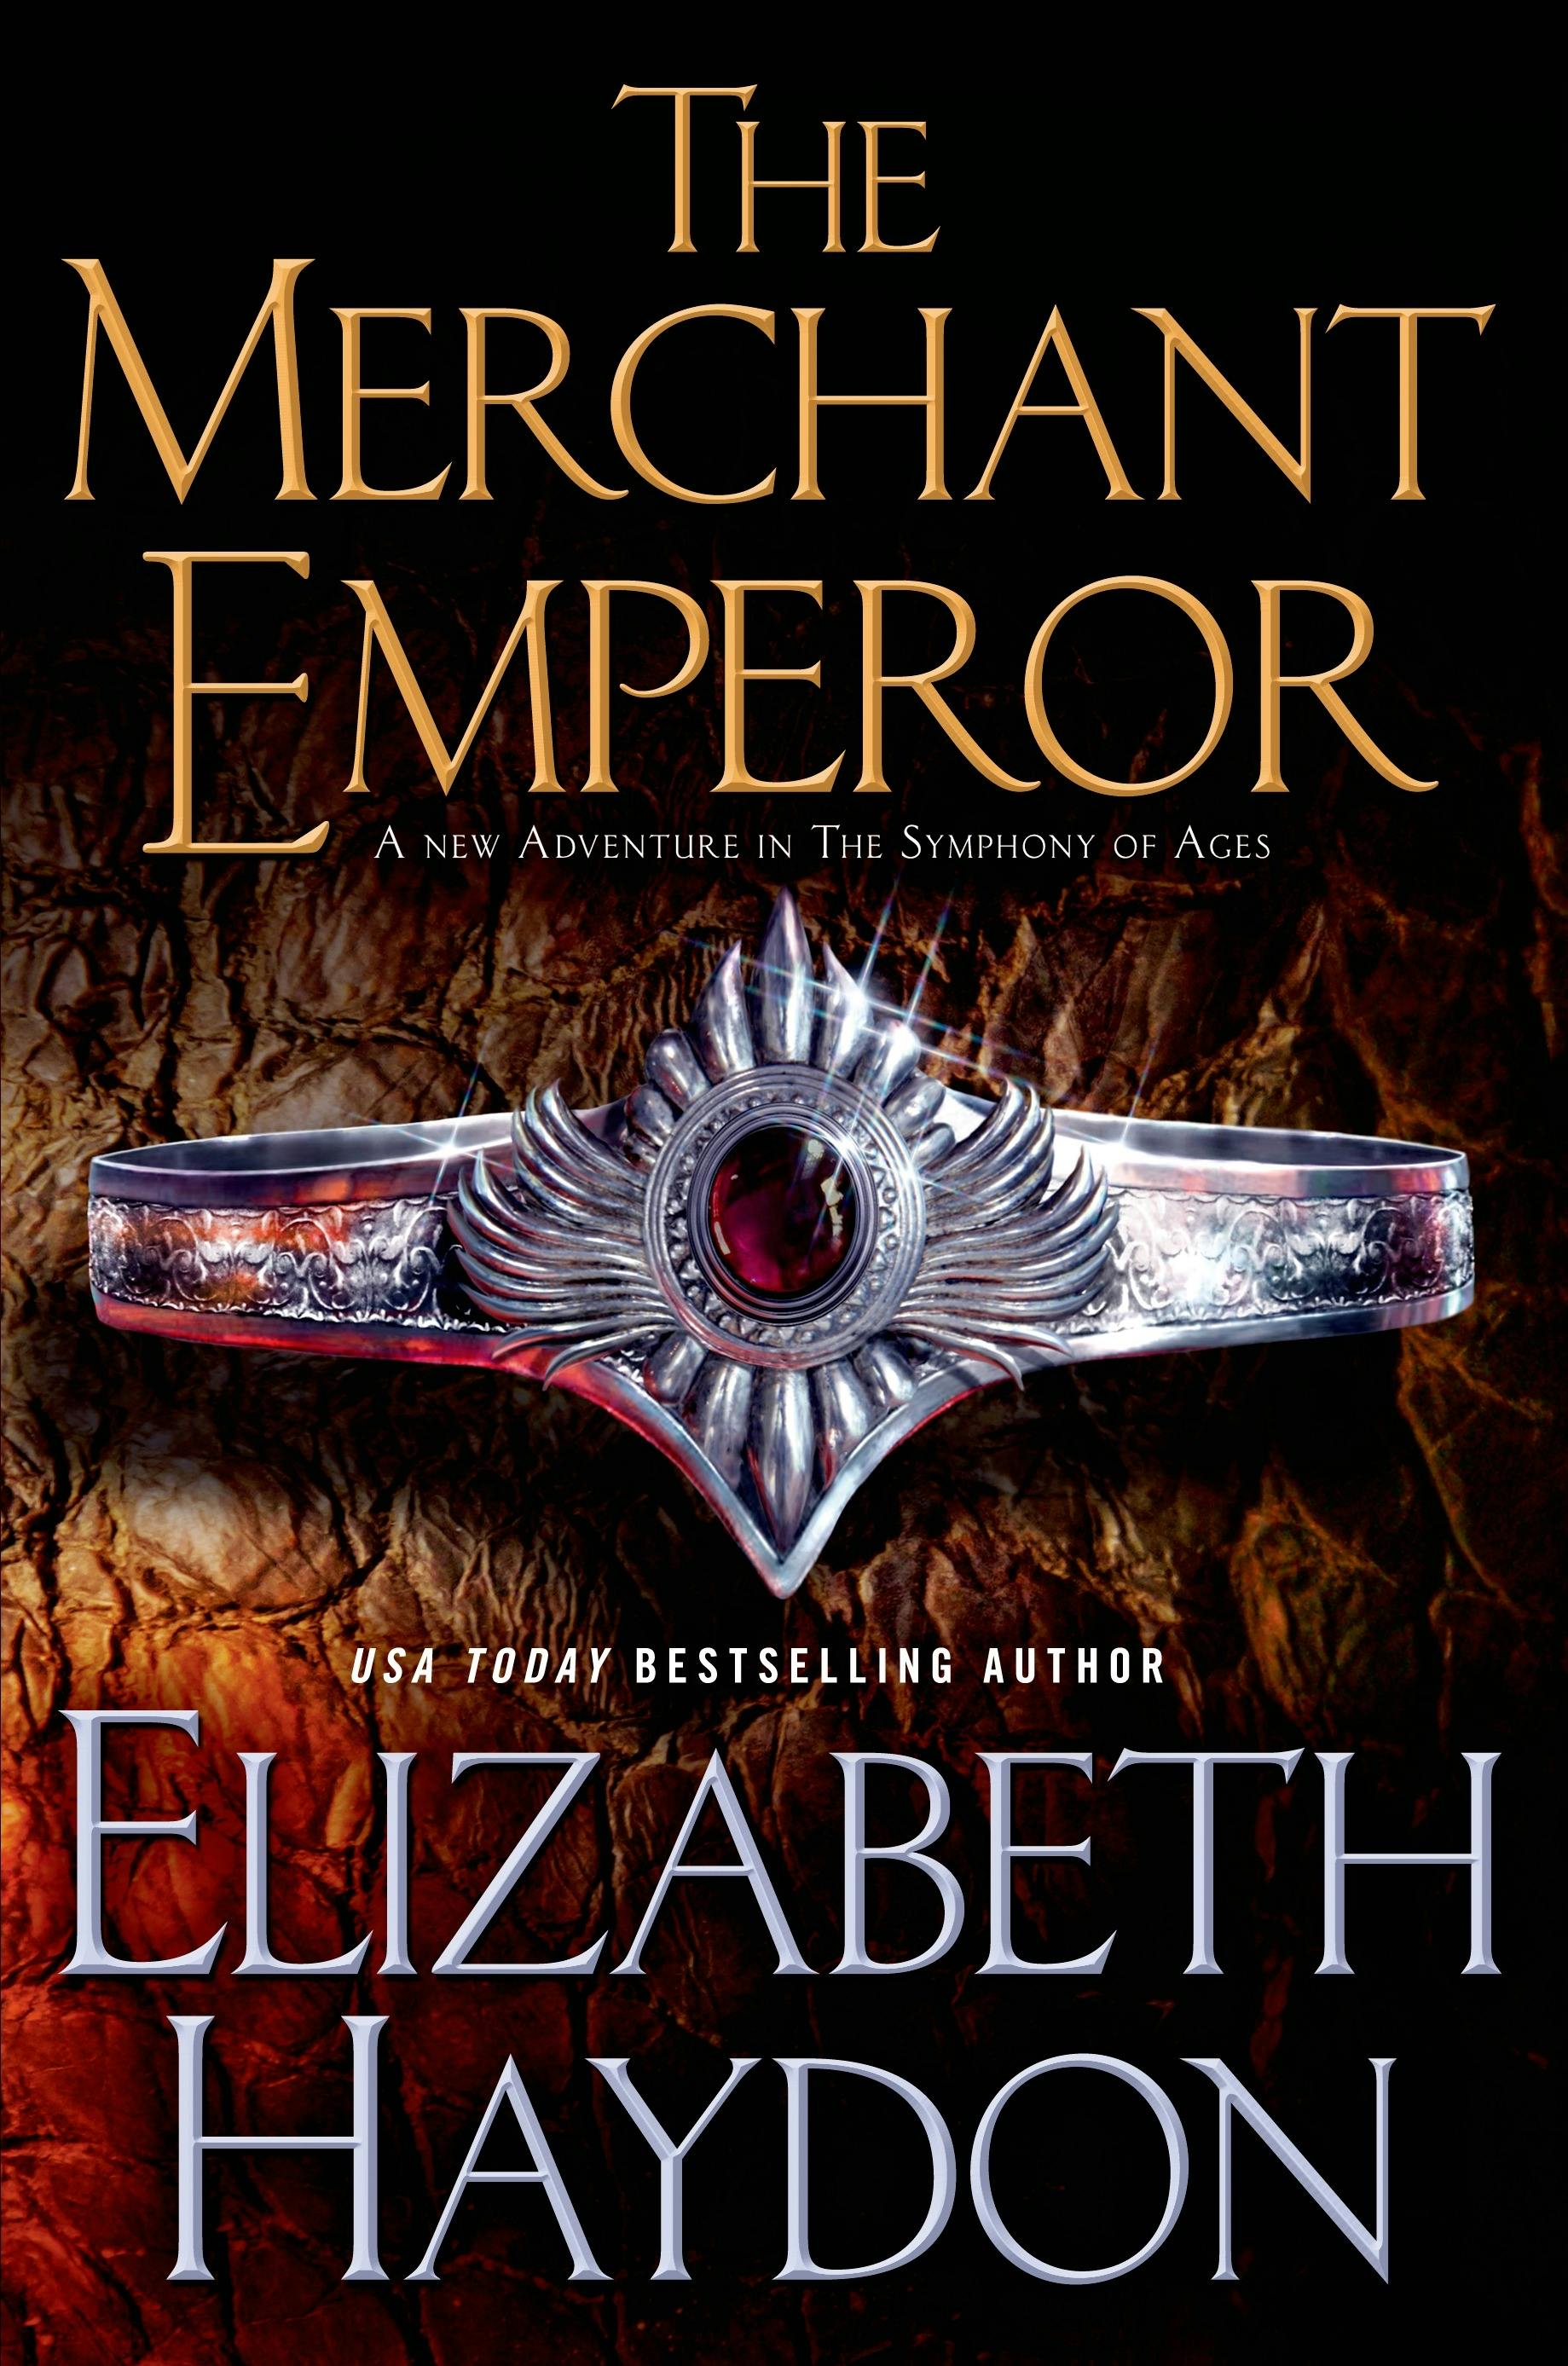 Cover for the book titled as: The Merchant Emperor